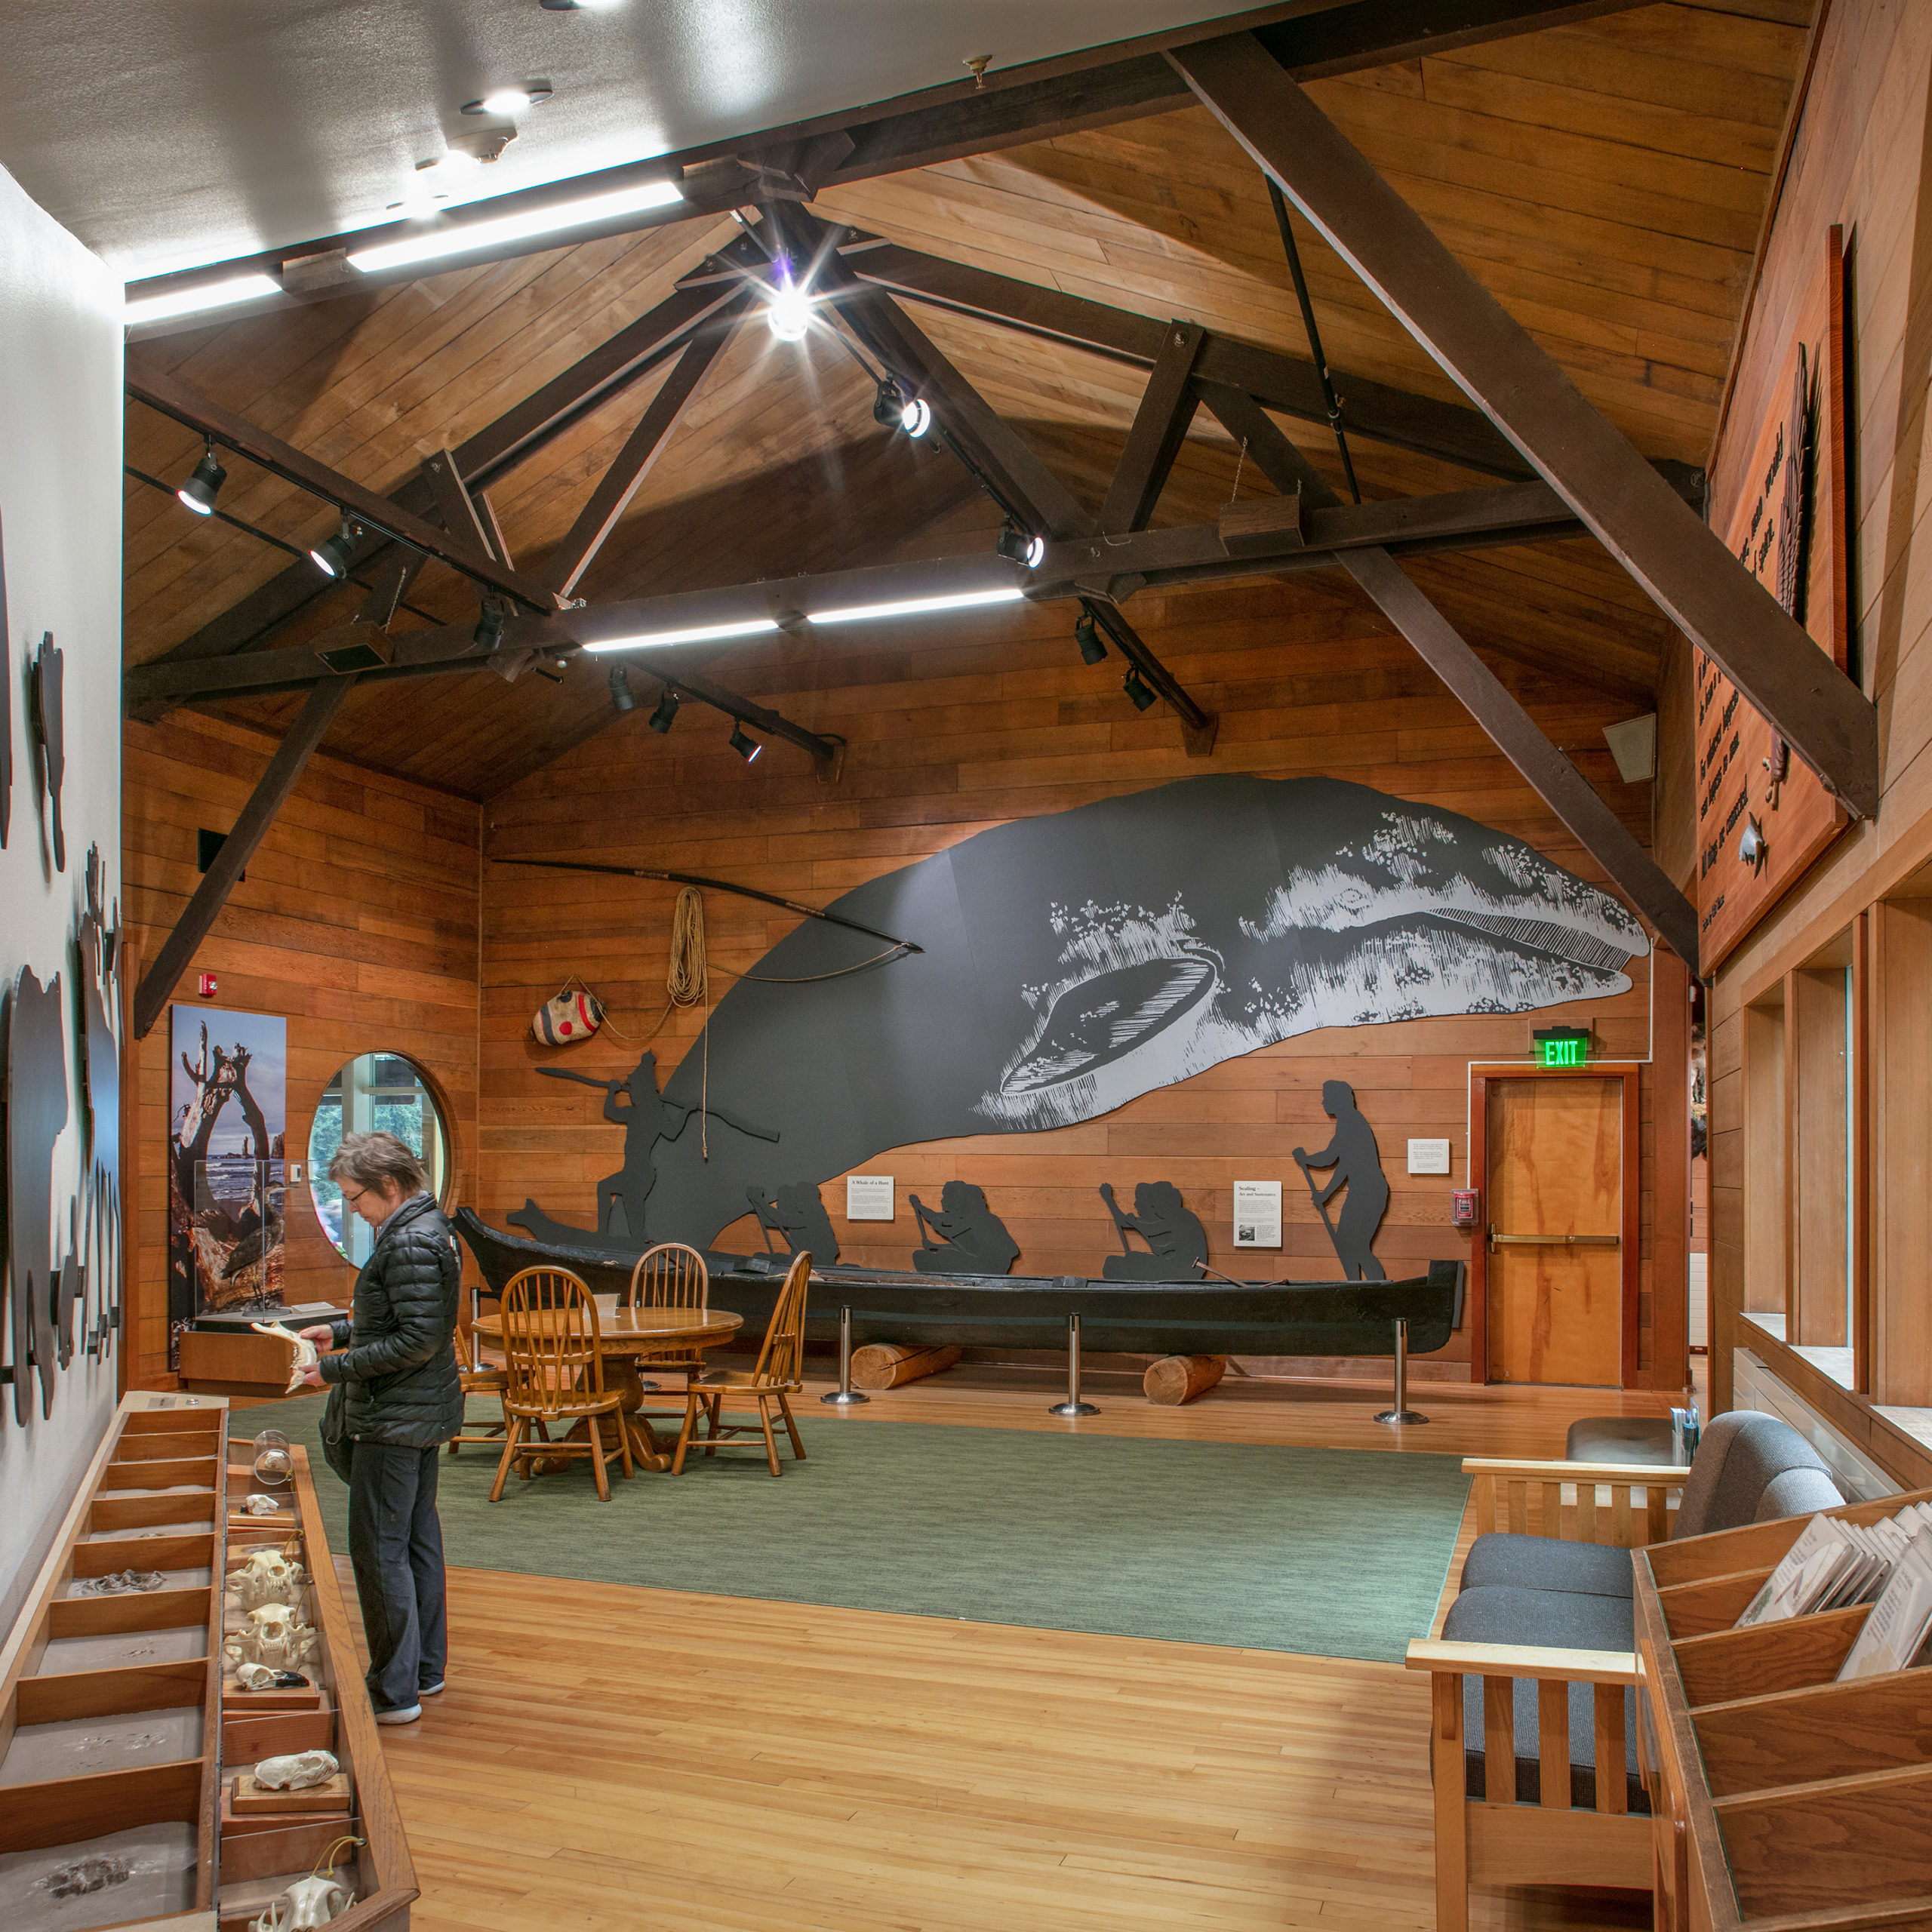 An exhibit at the Olympic National Park visitors center displaying a huge whale and people in a canoe